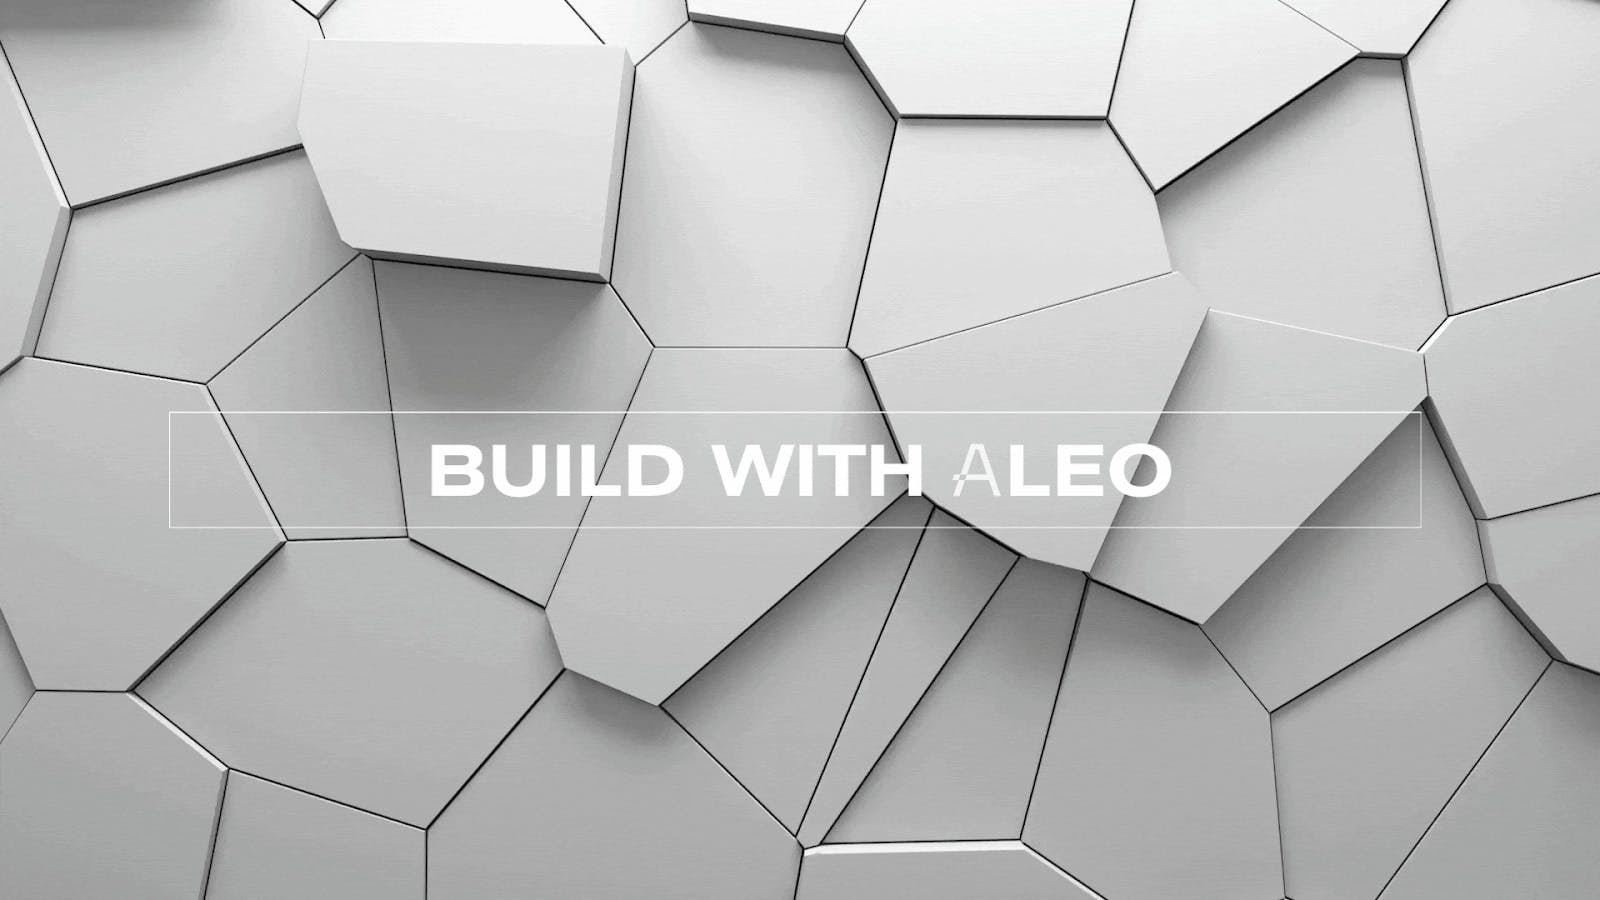 The early projects building on Aleo have worked hard to establish their standing with the founders of Aleo and the larger Aleo ecosystem. It seems these iterations and others to come throughout 2024 and beyond are just the beginnings of an ecosystem that will flourish long-term. (Animation Credit: Build with Aleo: Revolutionizing Privacy and Efficiency in the Blockchain World via Utah and Medium)